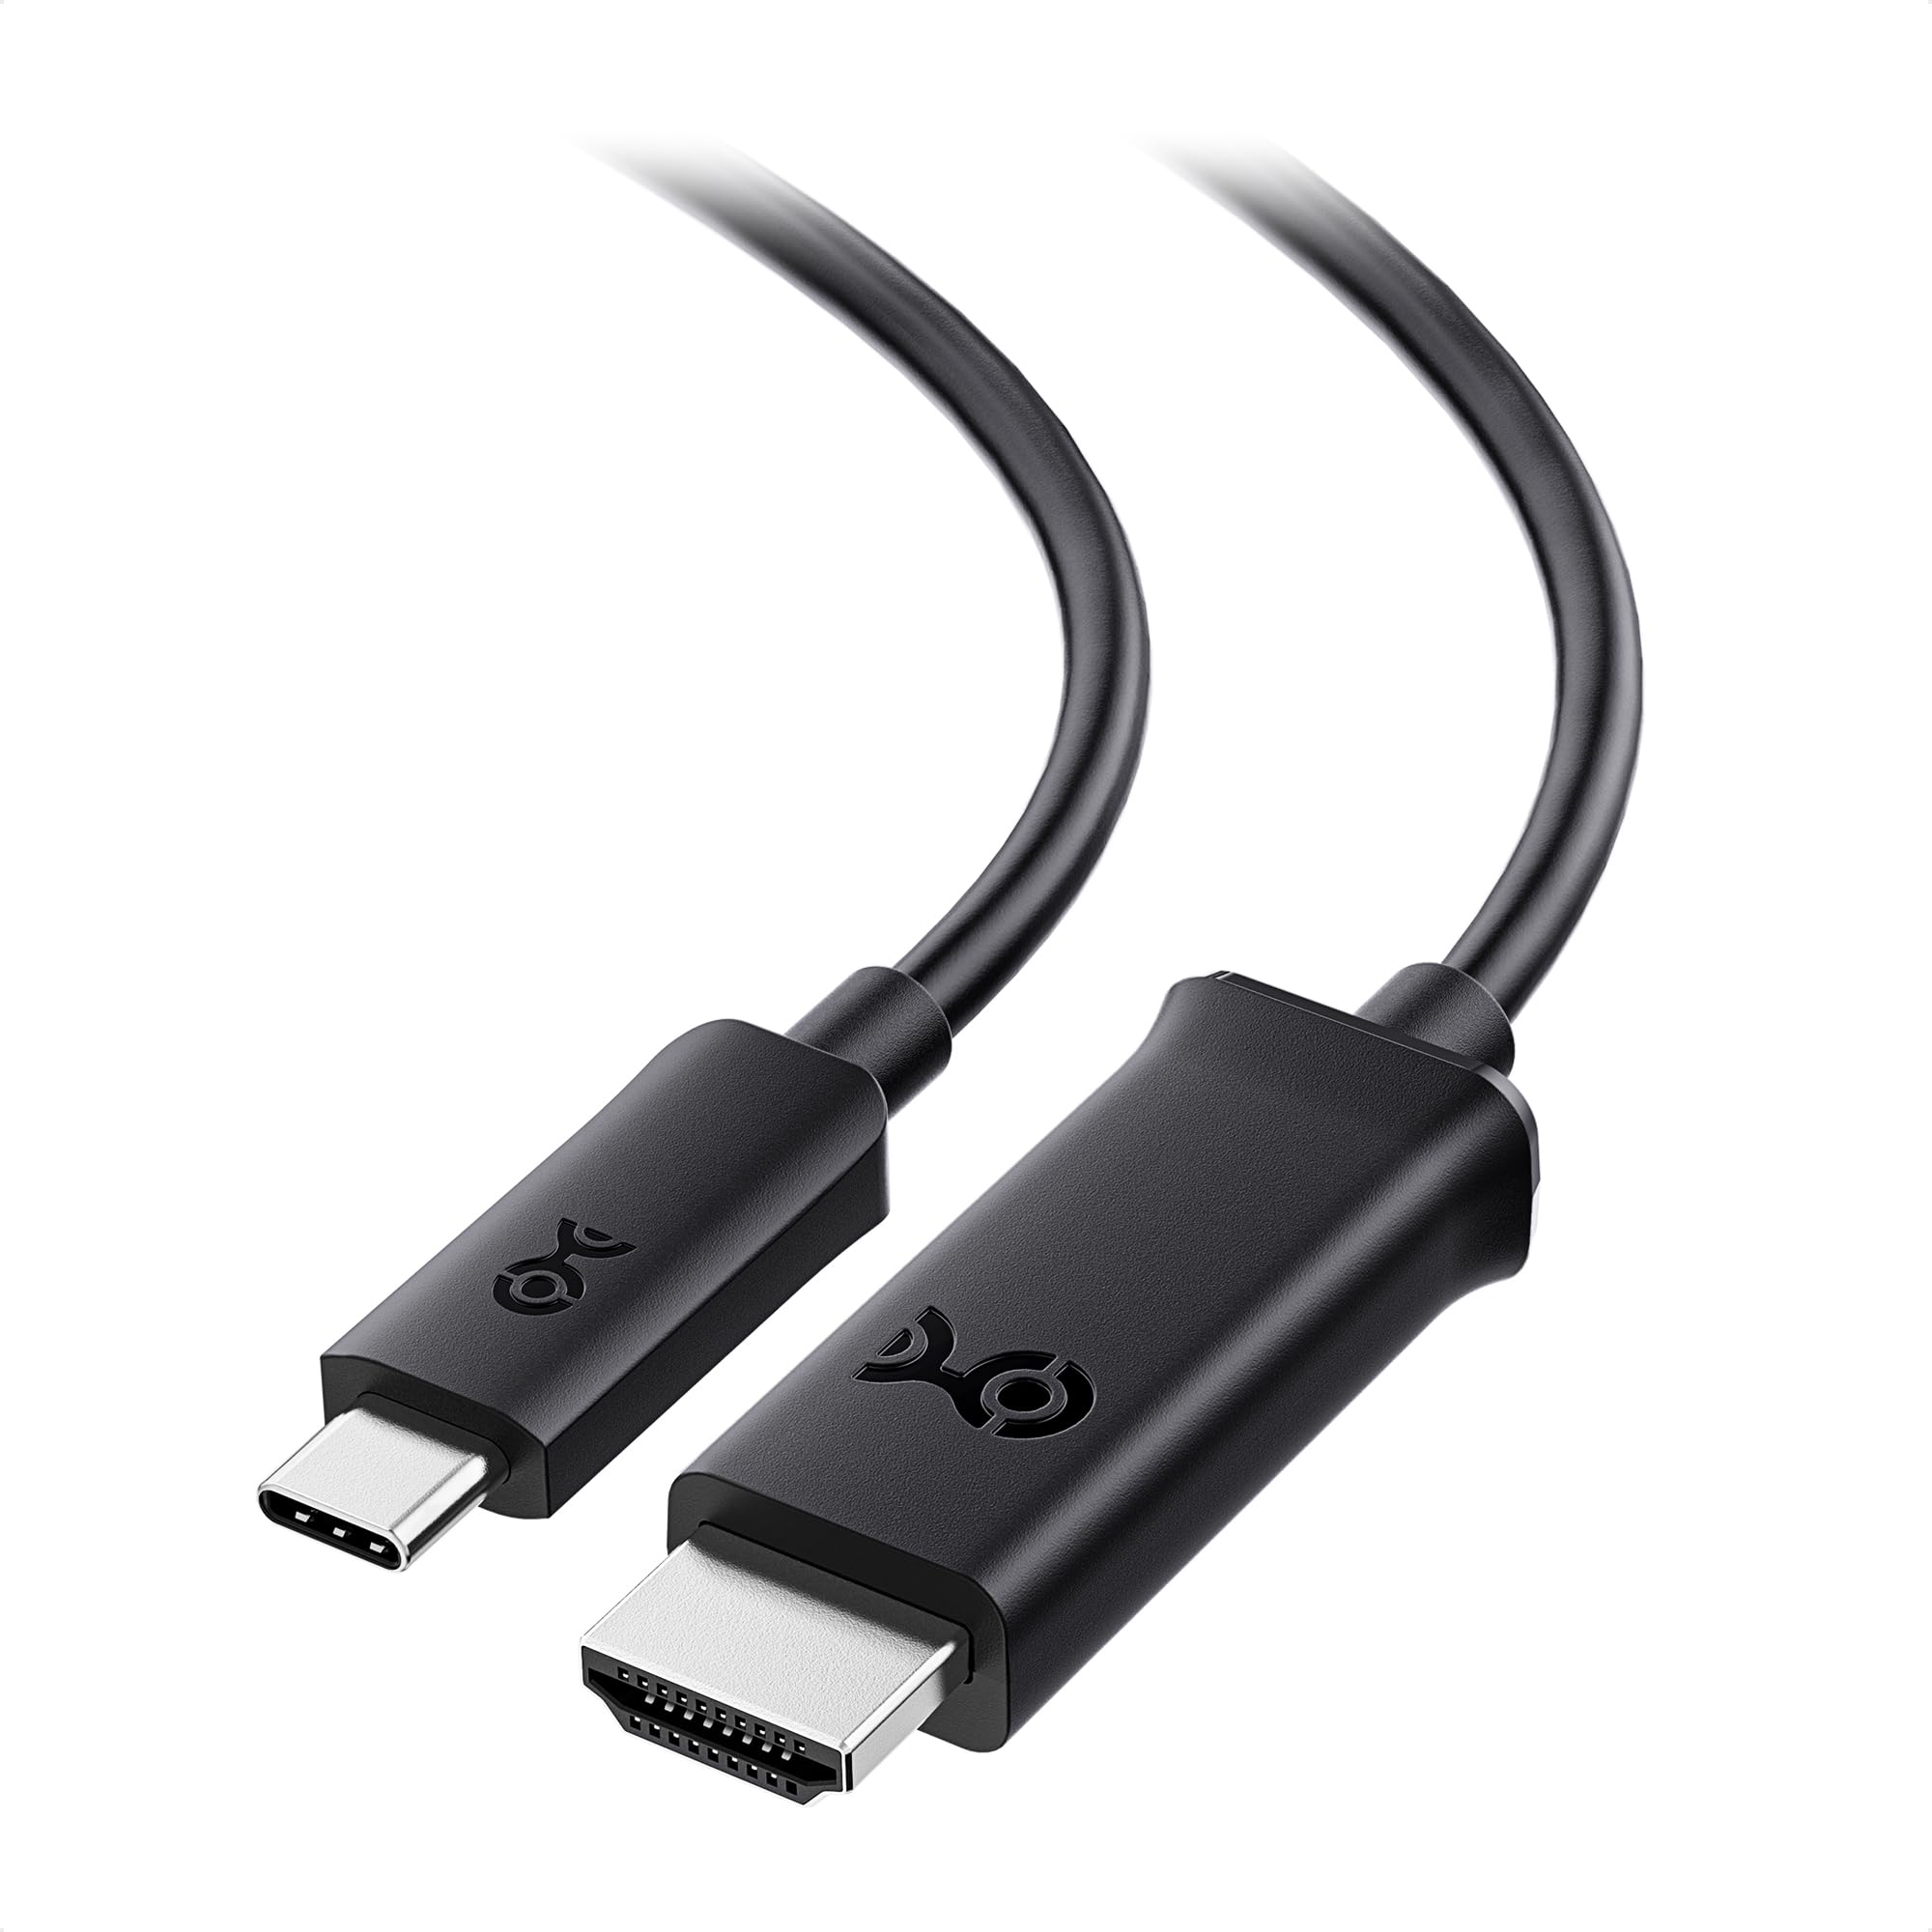 HDMI and USB cables connected properly.